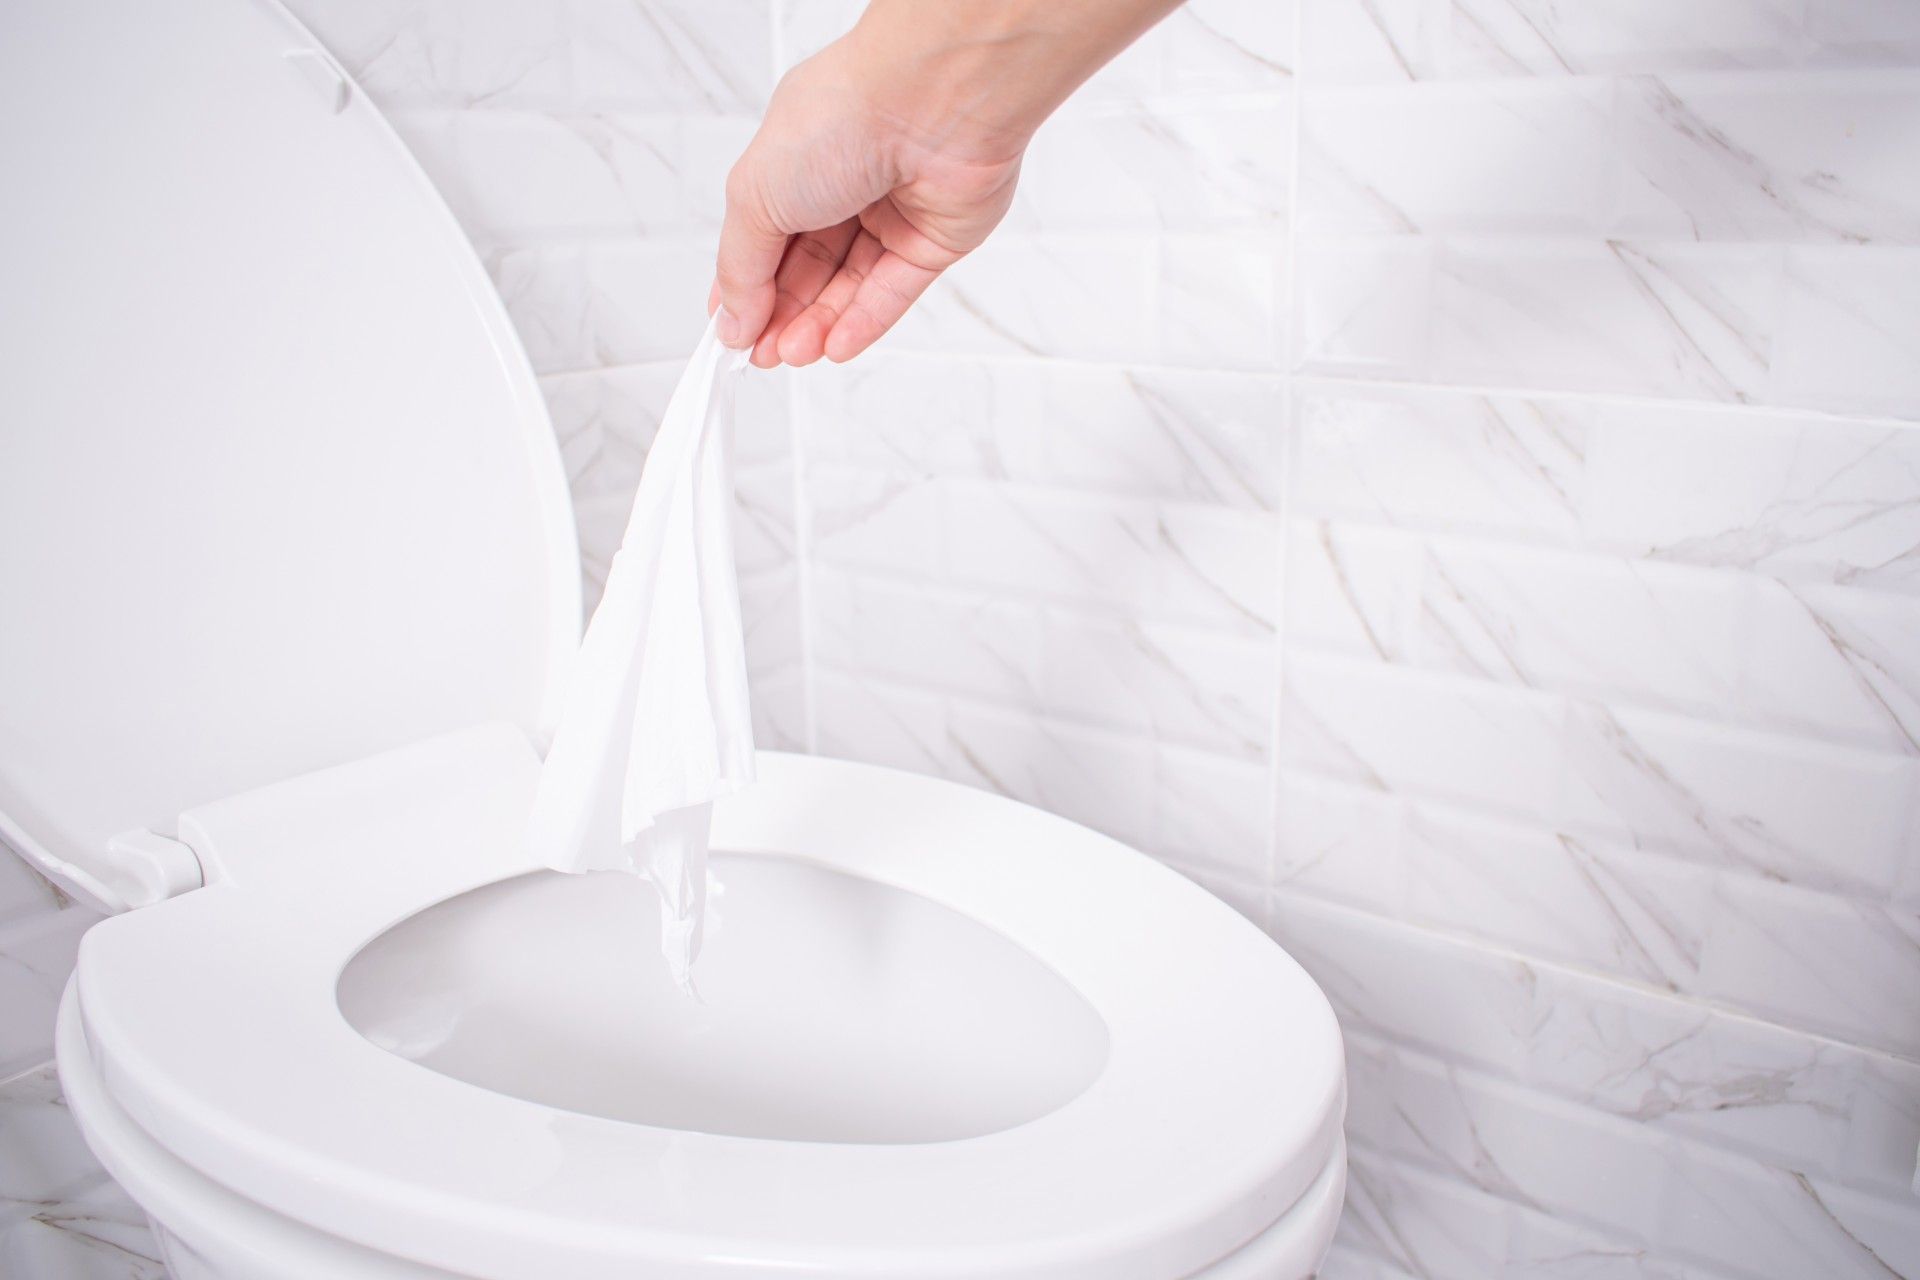 A person throws a wipe into a toilet near a white marble wall - flushable wipes